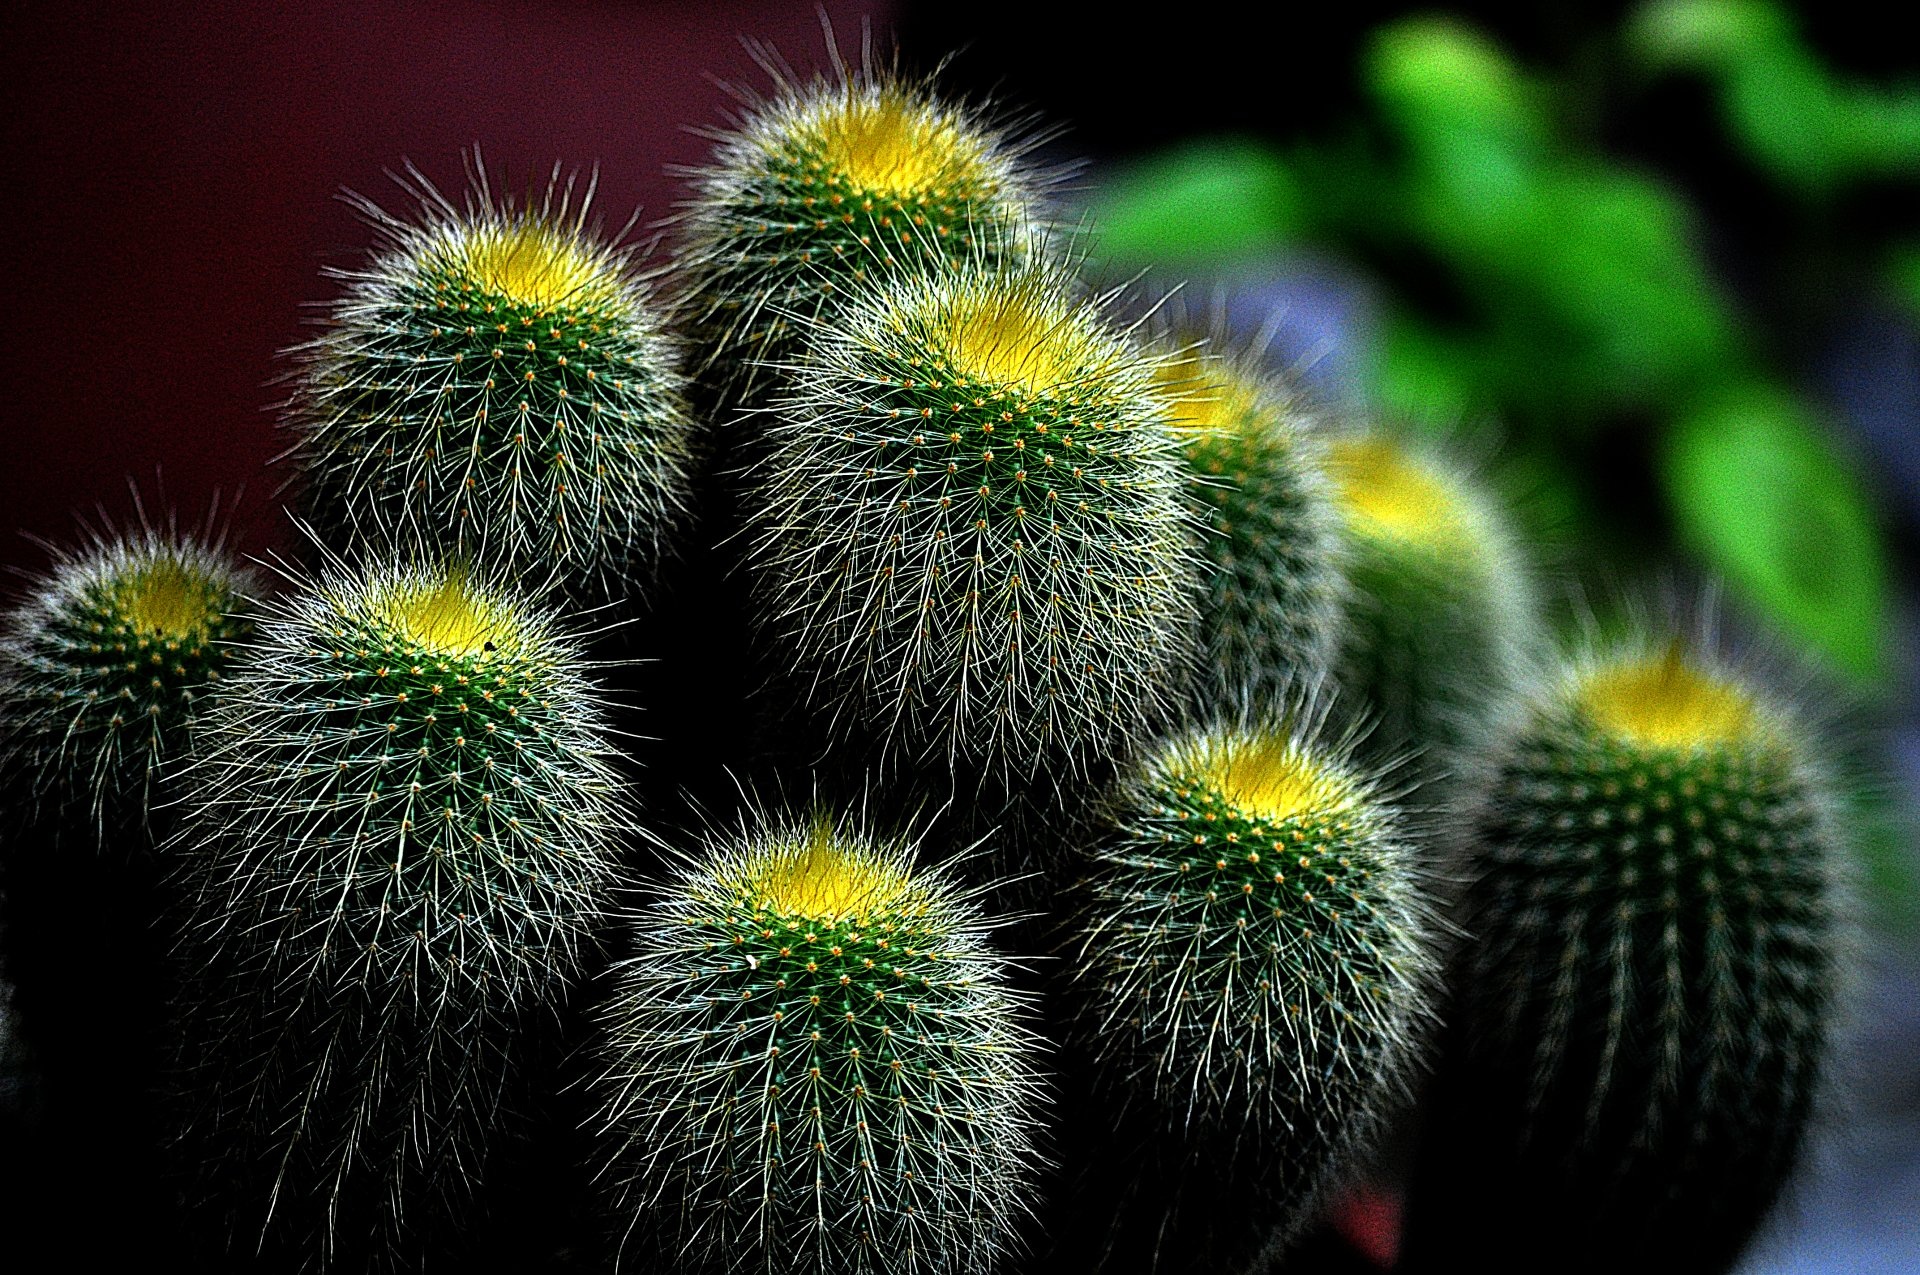 Cactus: Succulent perennials, most live in and are well adapted to dry regions. 1920x1280 HD Background.